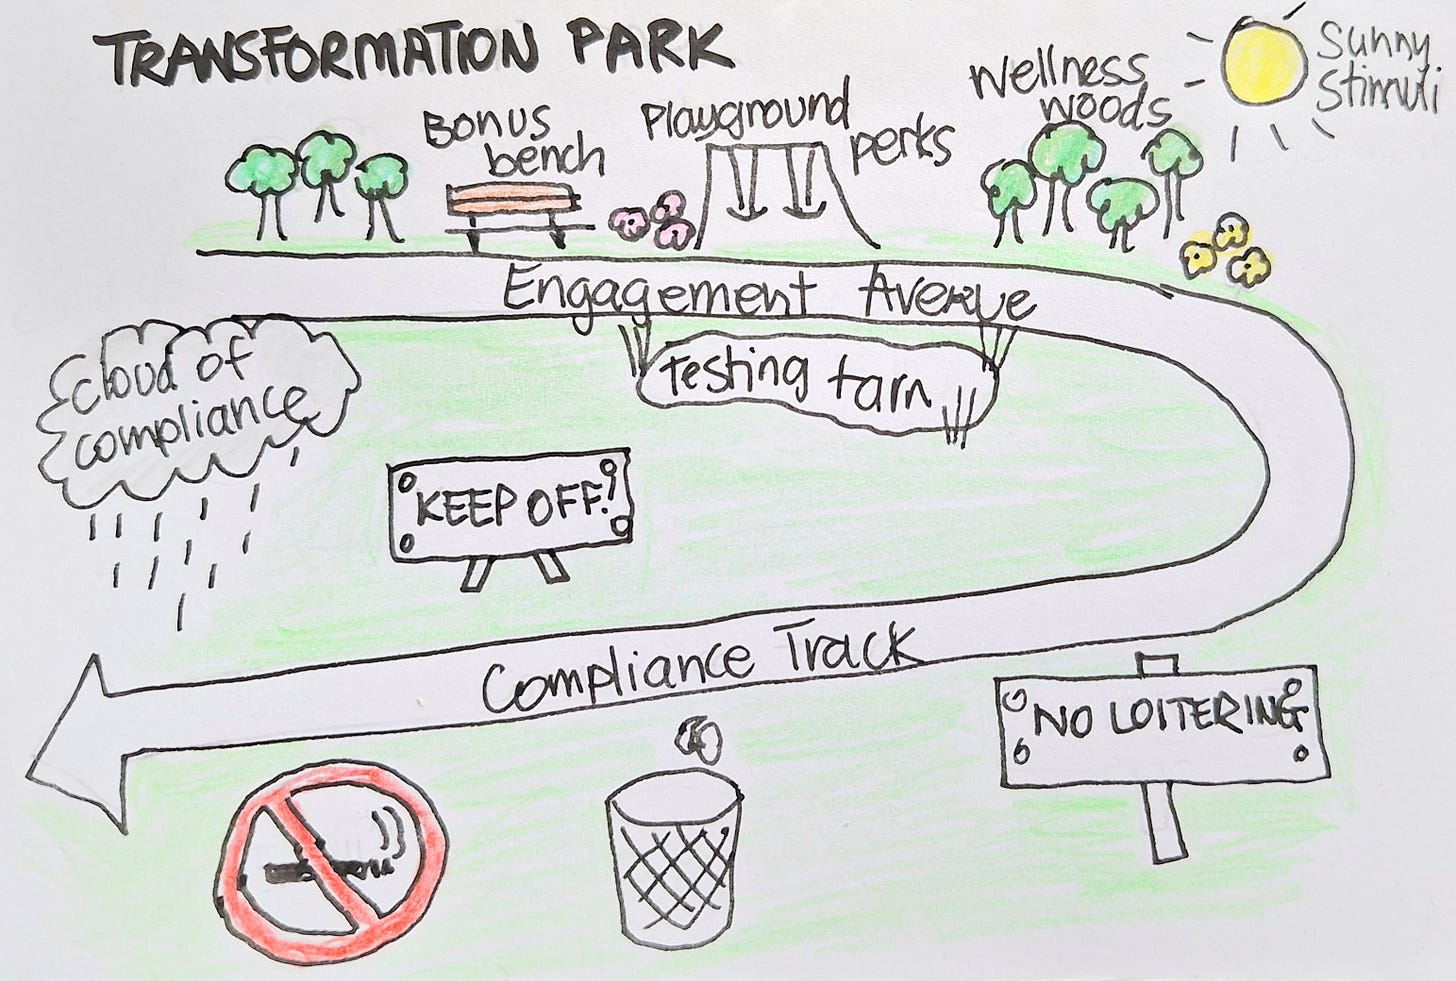 Cartoon sketch of a park with attractive benefits on one path, and warnings to comply on the other side.